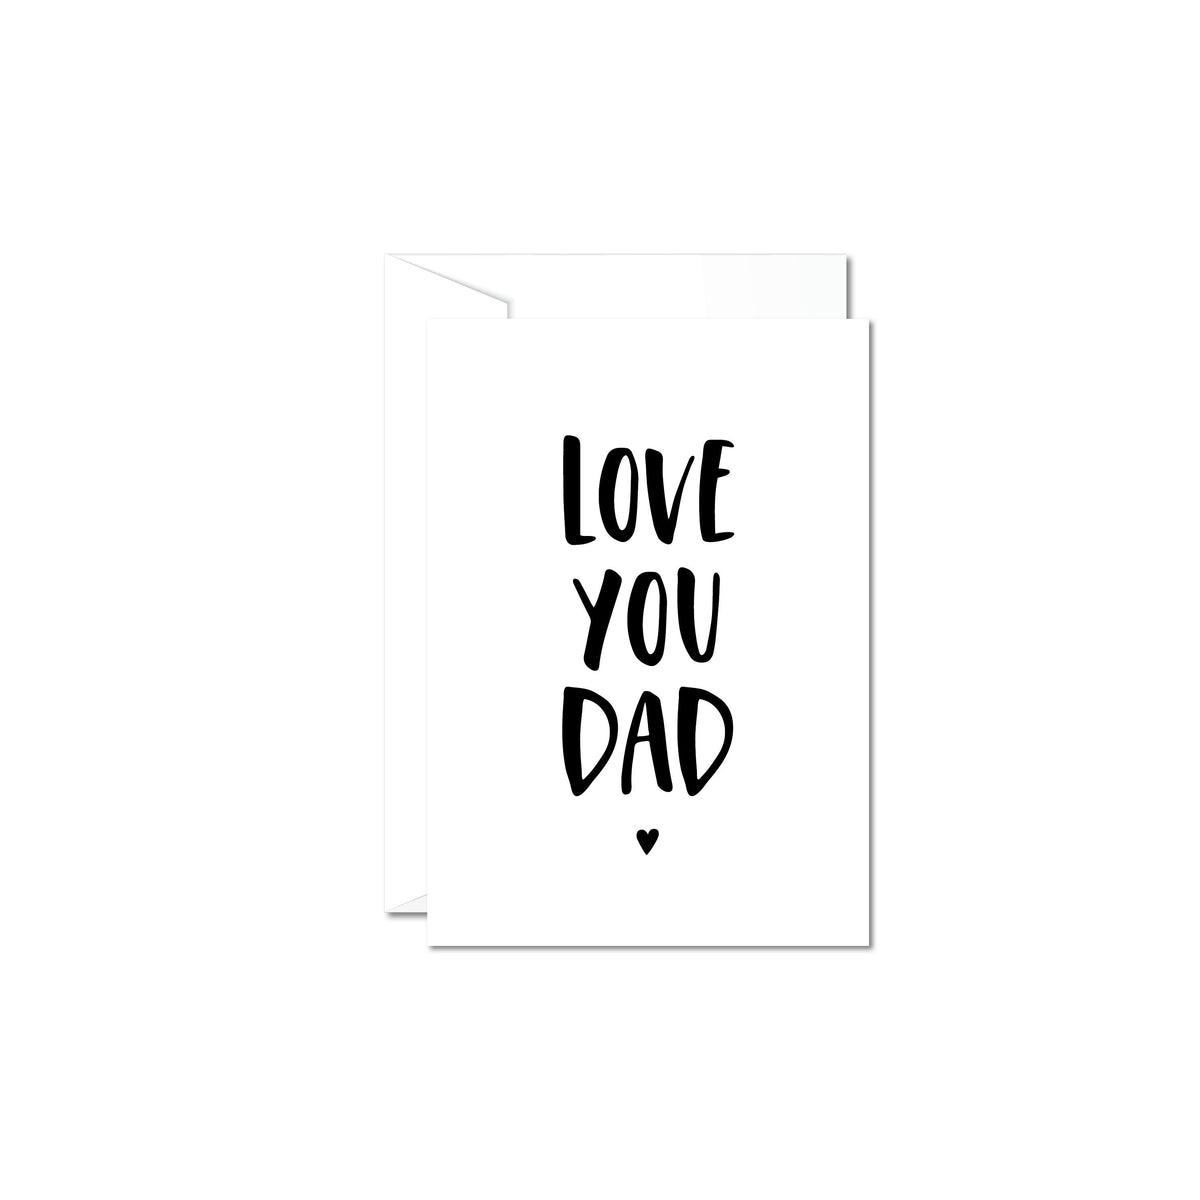 NZ Fathers day gifts for him from Boxsmith Gift Boxes and NZ Gift Hampers. The 'Love You Dad' card is the perfect accompaniment to your Fathers day gift. Easy delivery NZ wide of our online NZ gifts for him